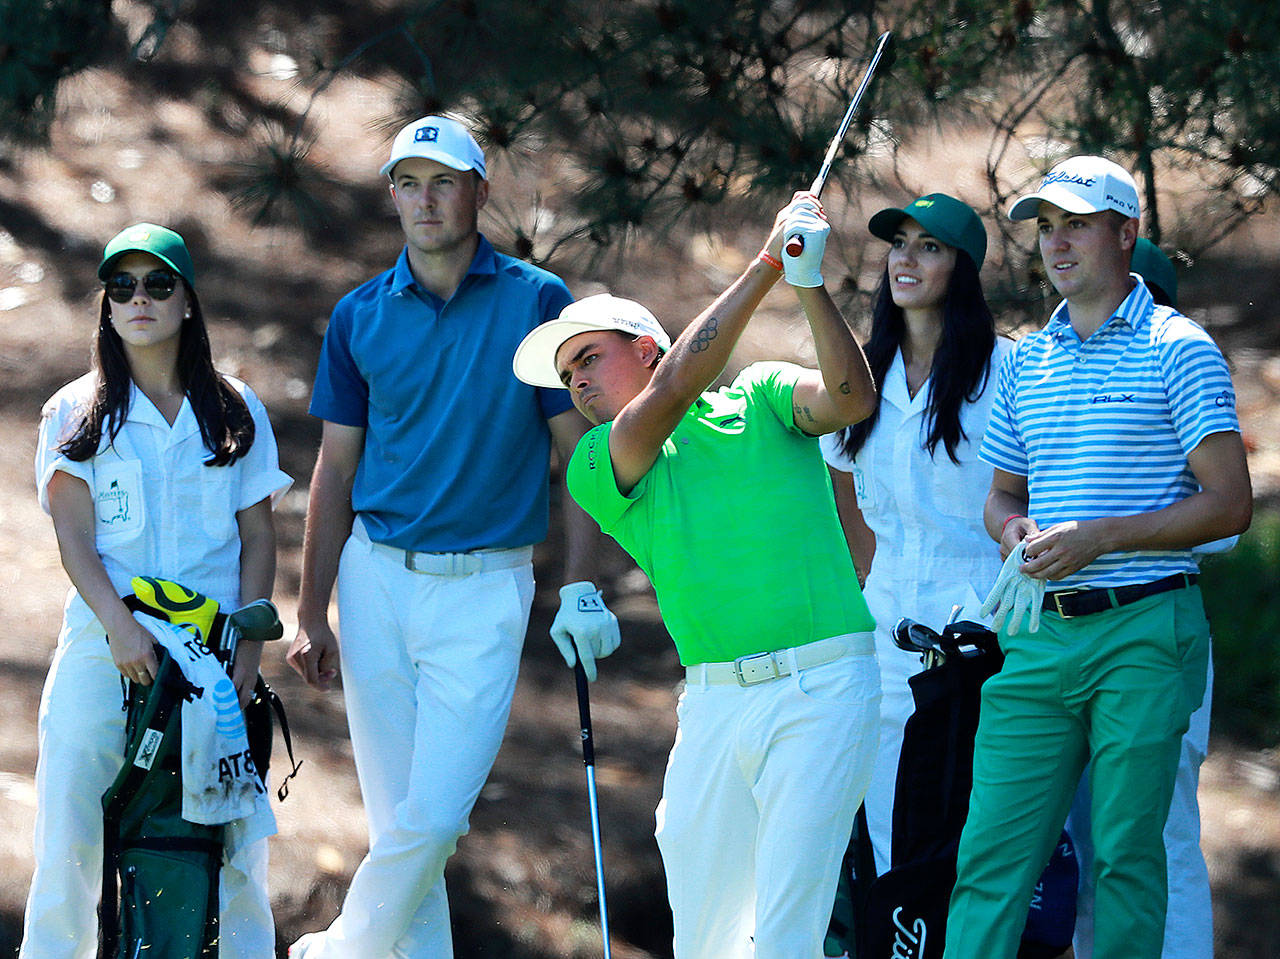 Jordan Spieth (left), Rickie Fowler (middle), and Justin Thomas tee off on the fourth hole during the Masters Par -3 Contest at Augusta National Golf Club on Wednesday, April 10, 2019, in Augusta, Ga. (Curtis Compton/Atlanta Journal-Constitution/TNS)